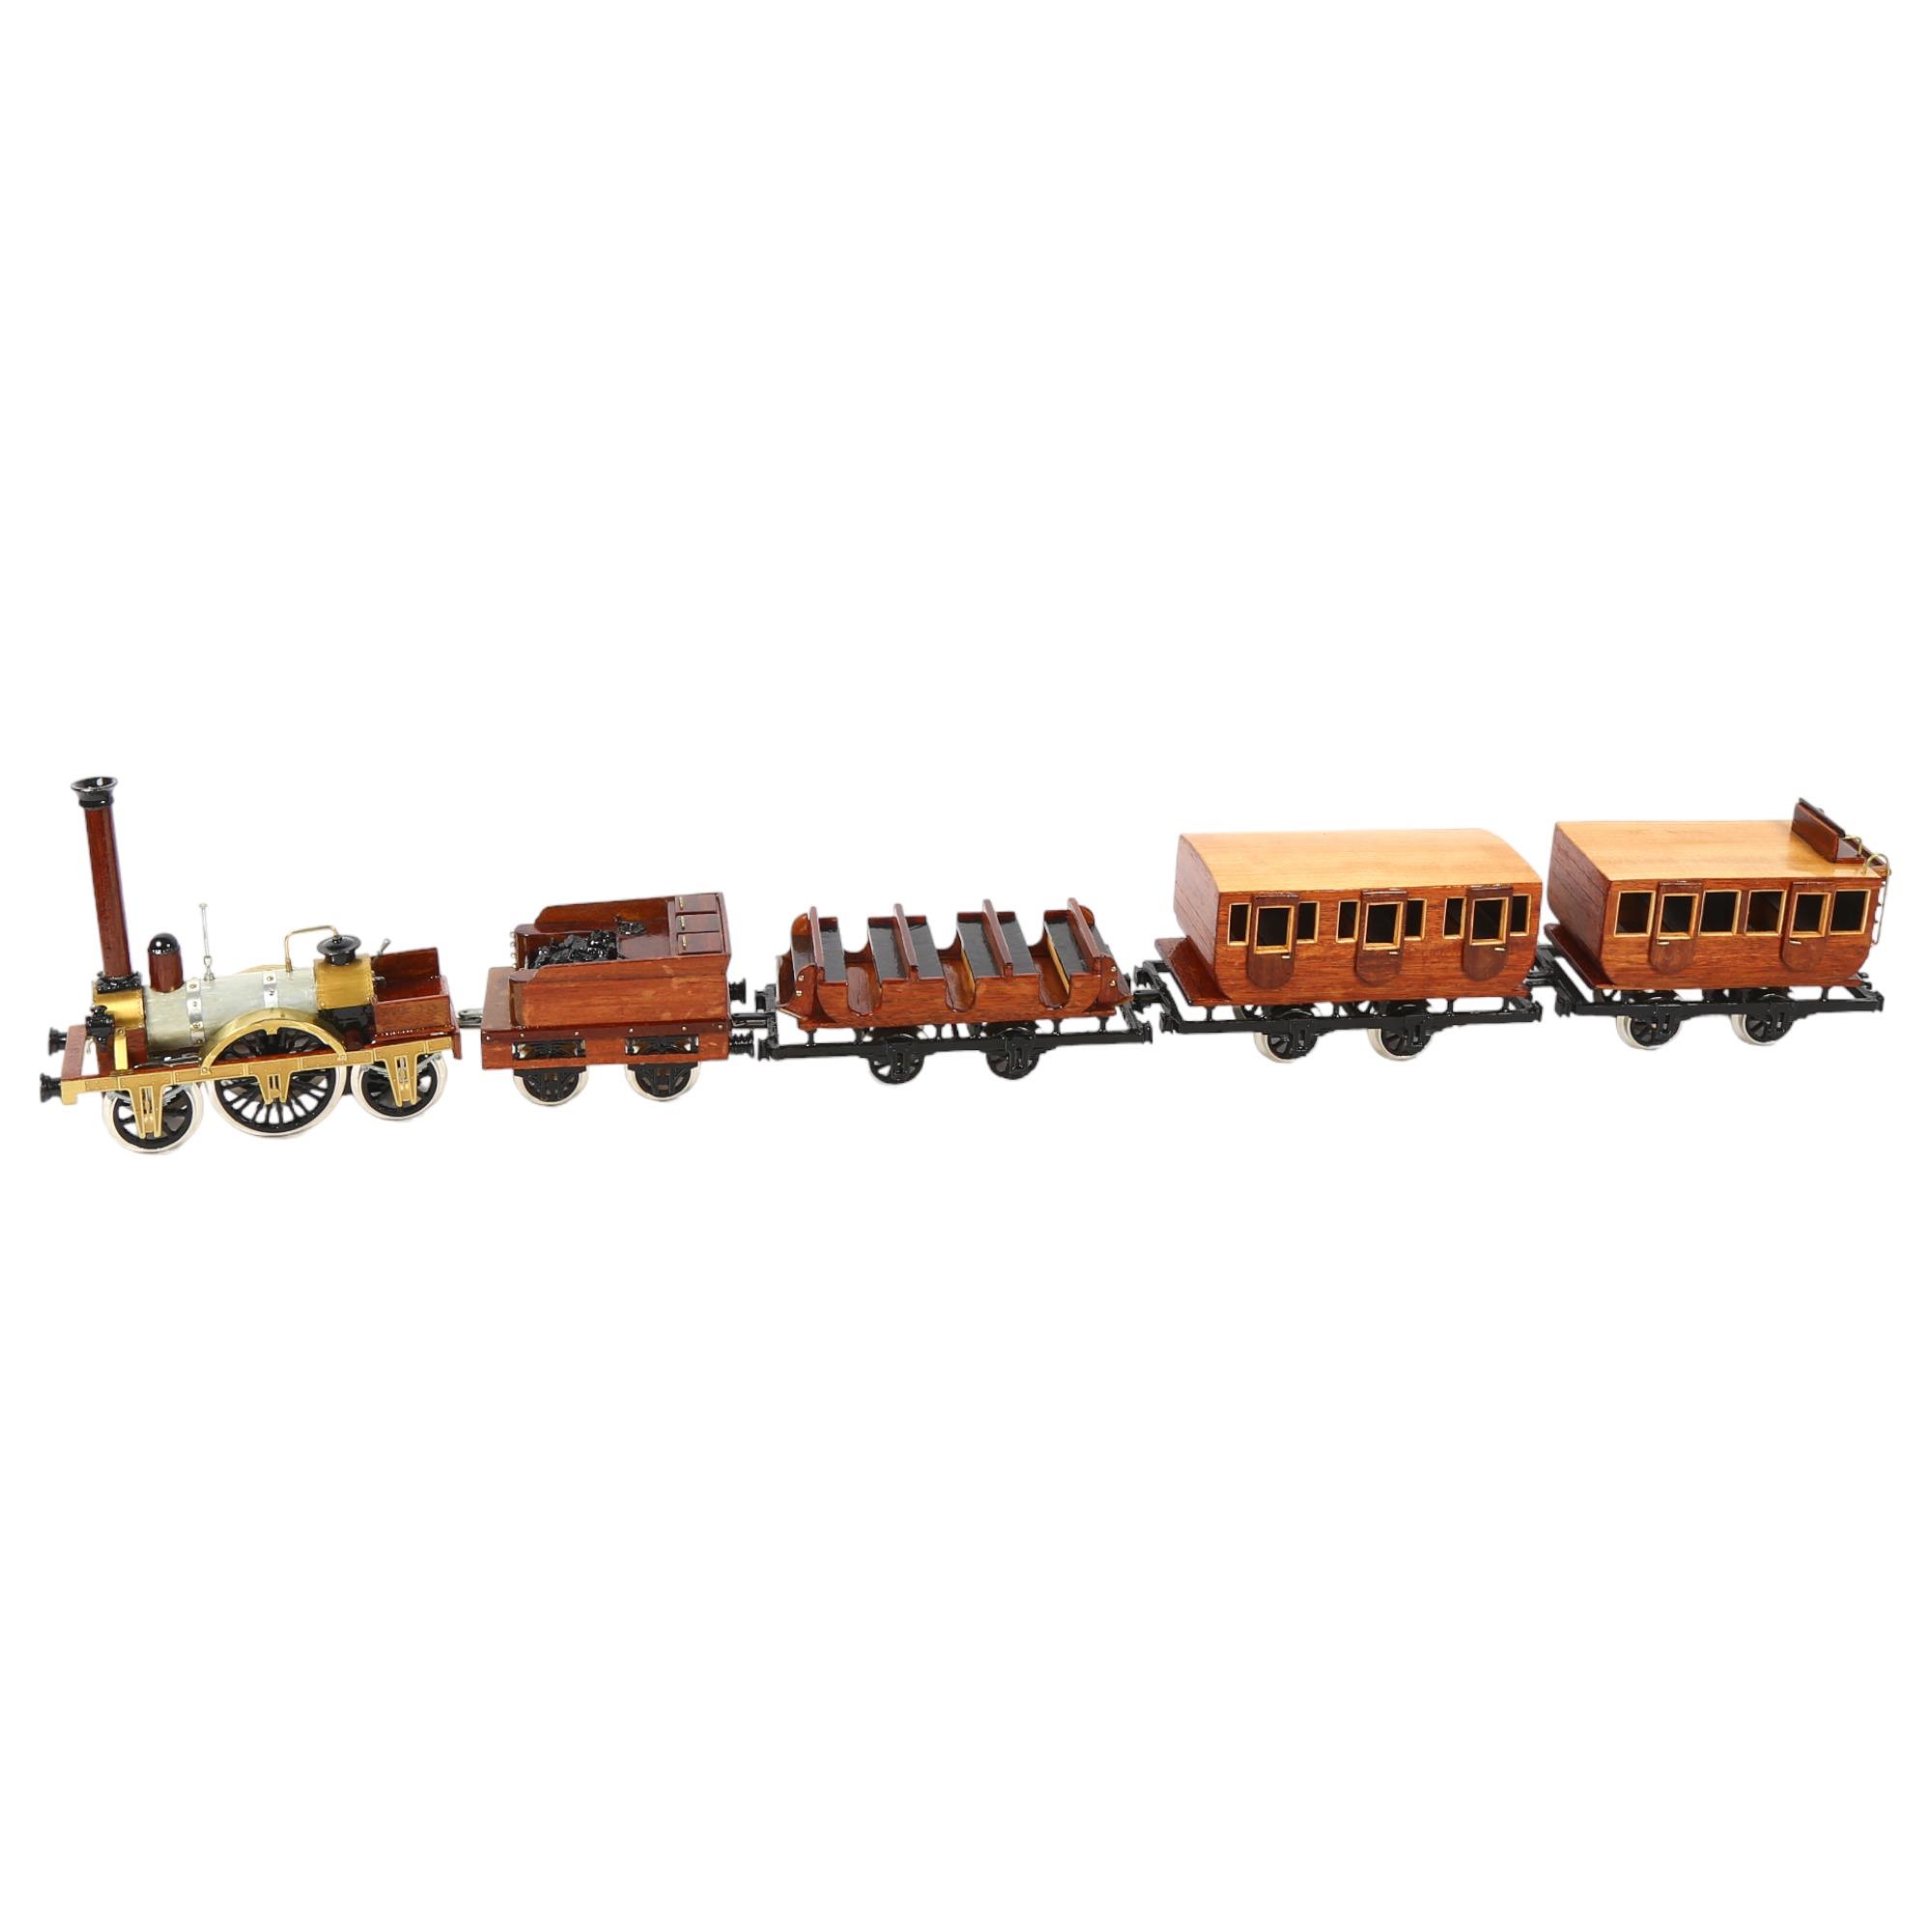 A handmade wooden model of the Adler locomotive, with tender and passenger carriages, overall length